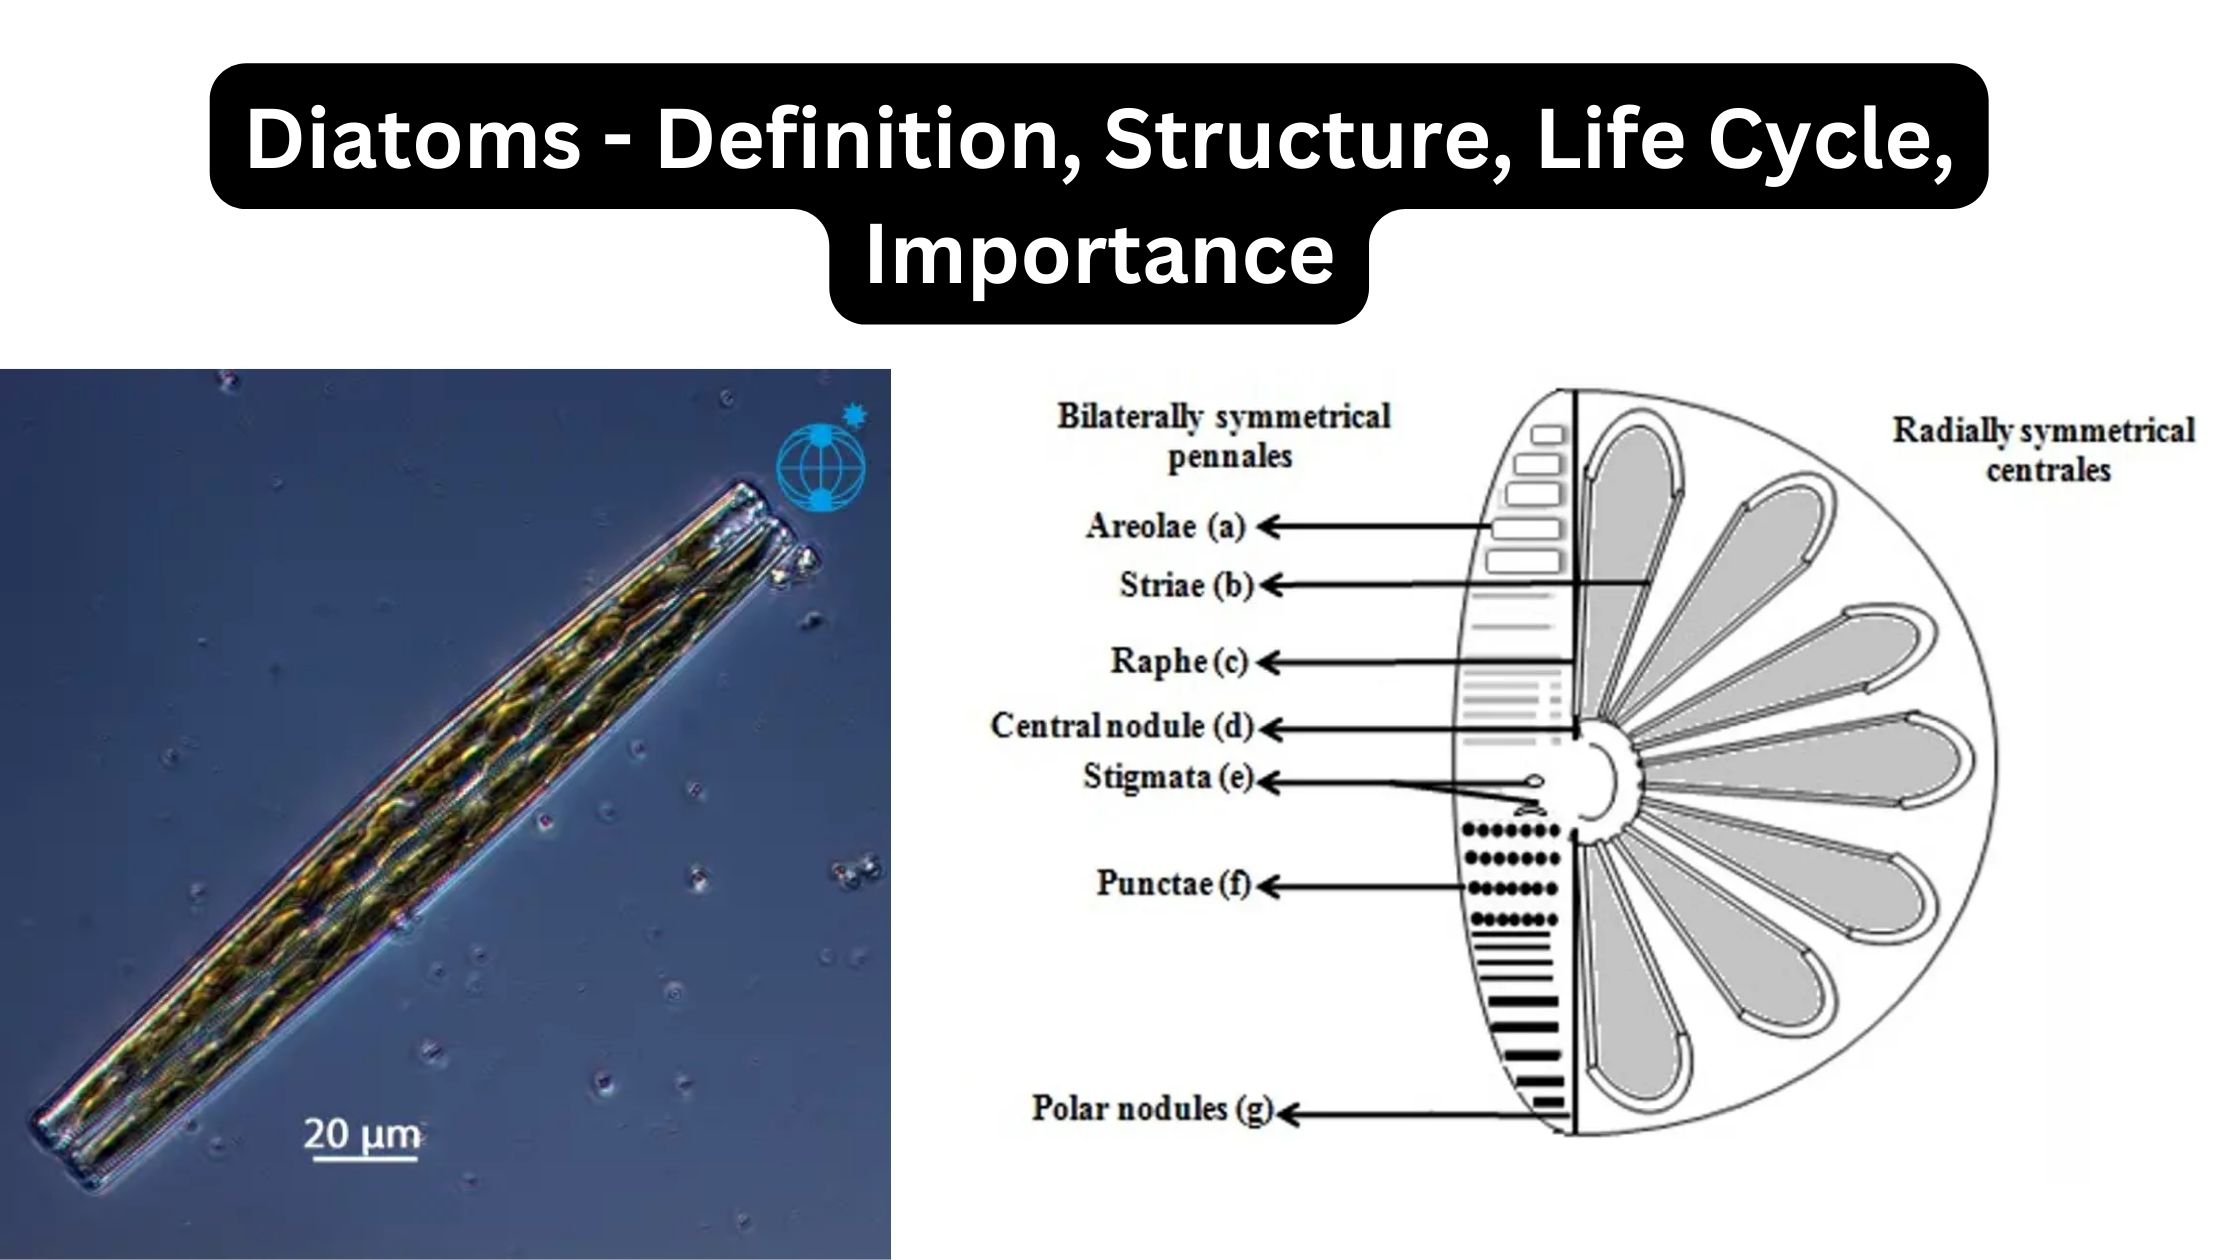 Diatoms - Definition, Structure, Life Cycle, Importance